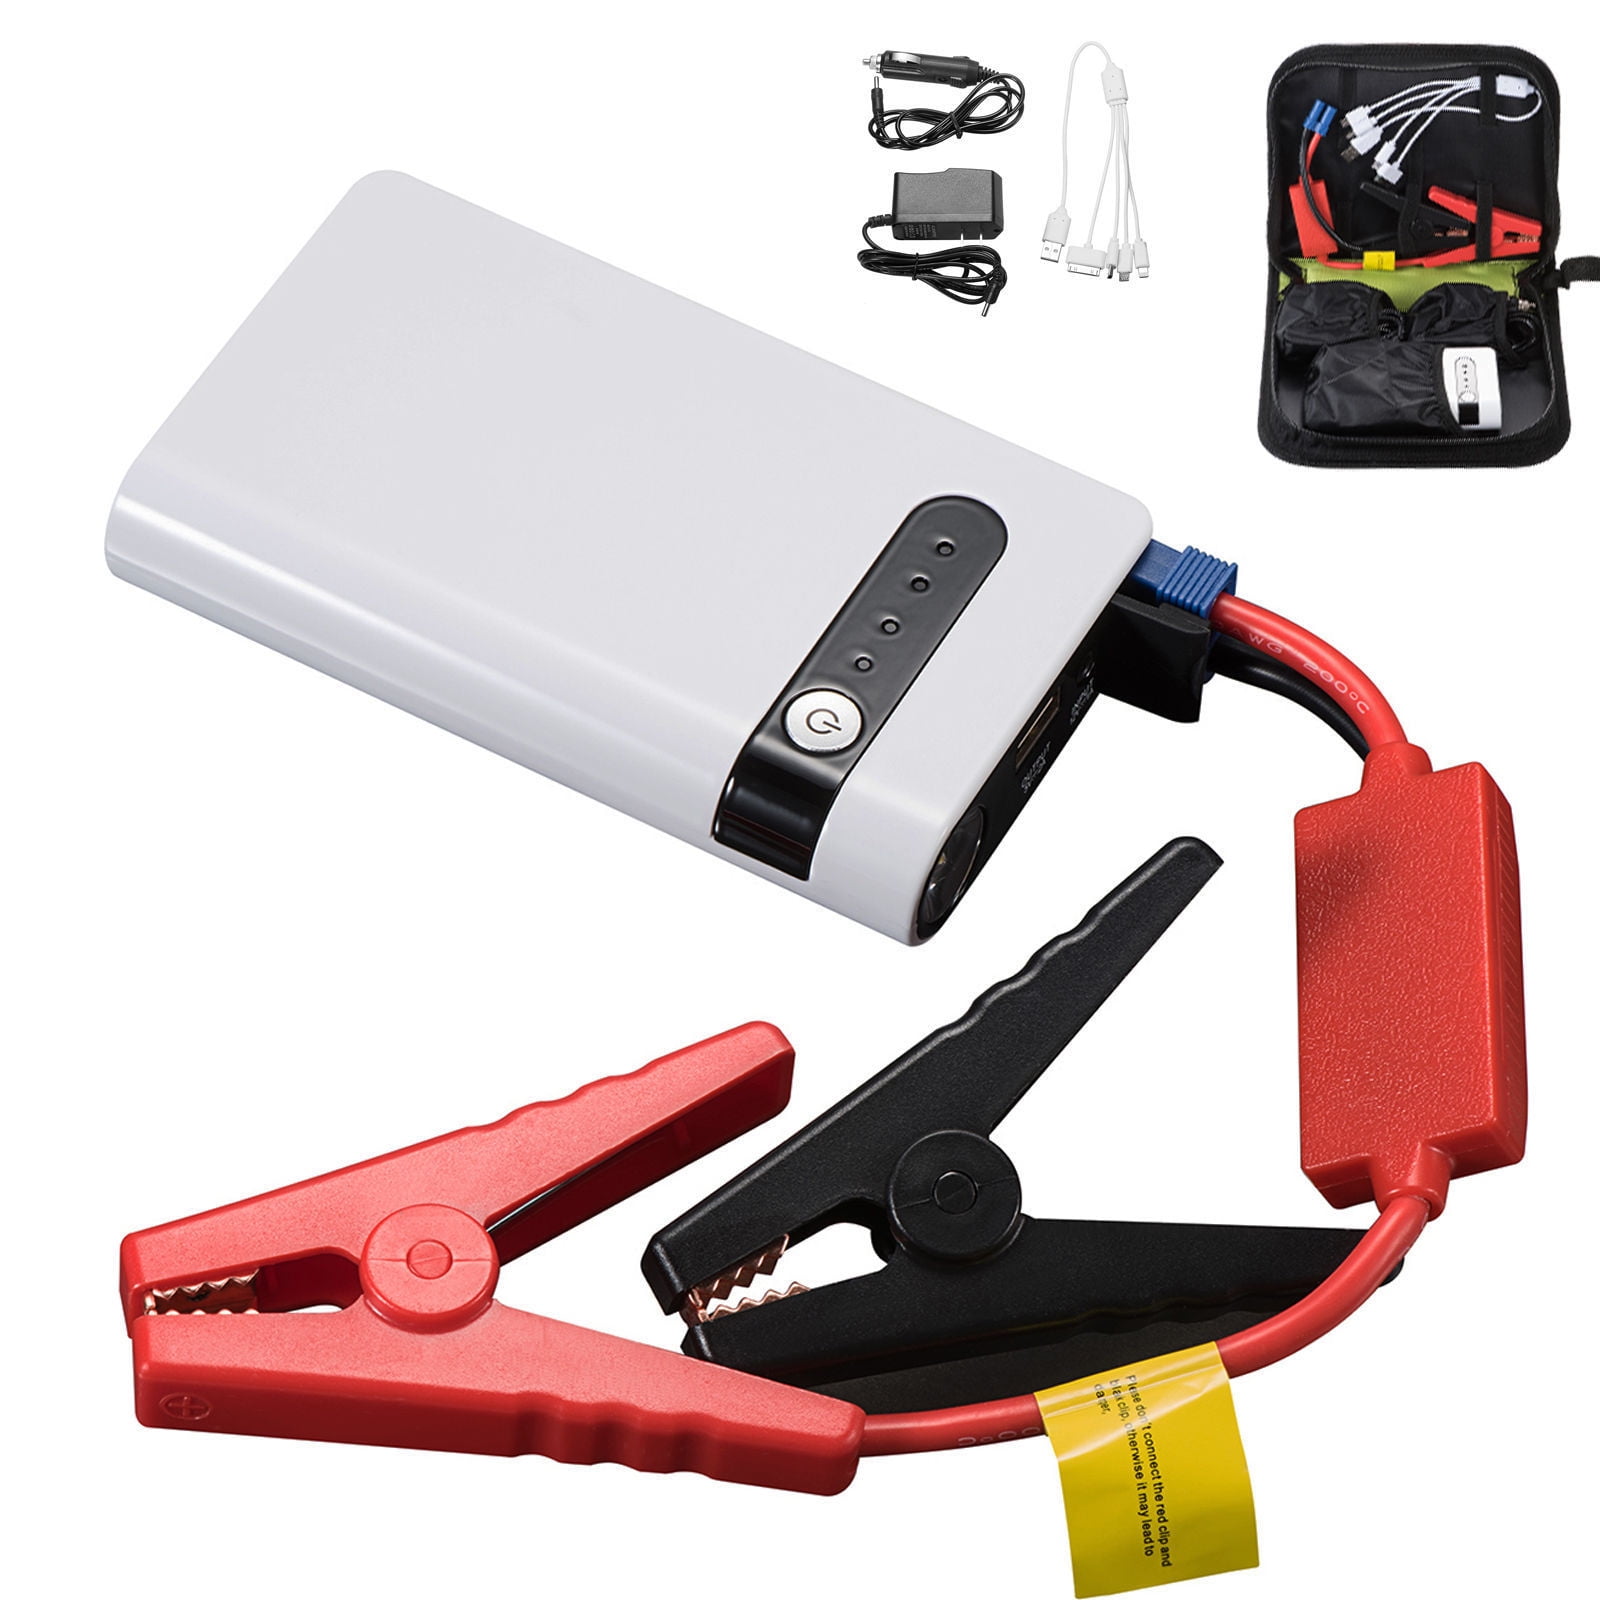 200A LCD Auto Car Battery Charger Power Bank Jump Starter Portable Power Bank US 